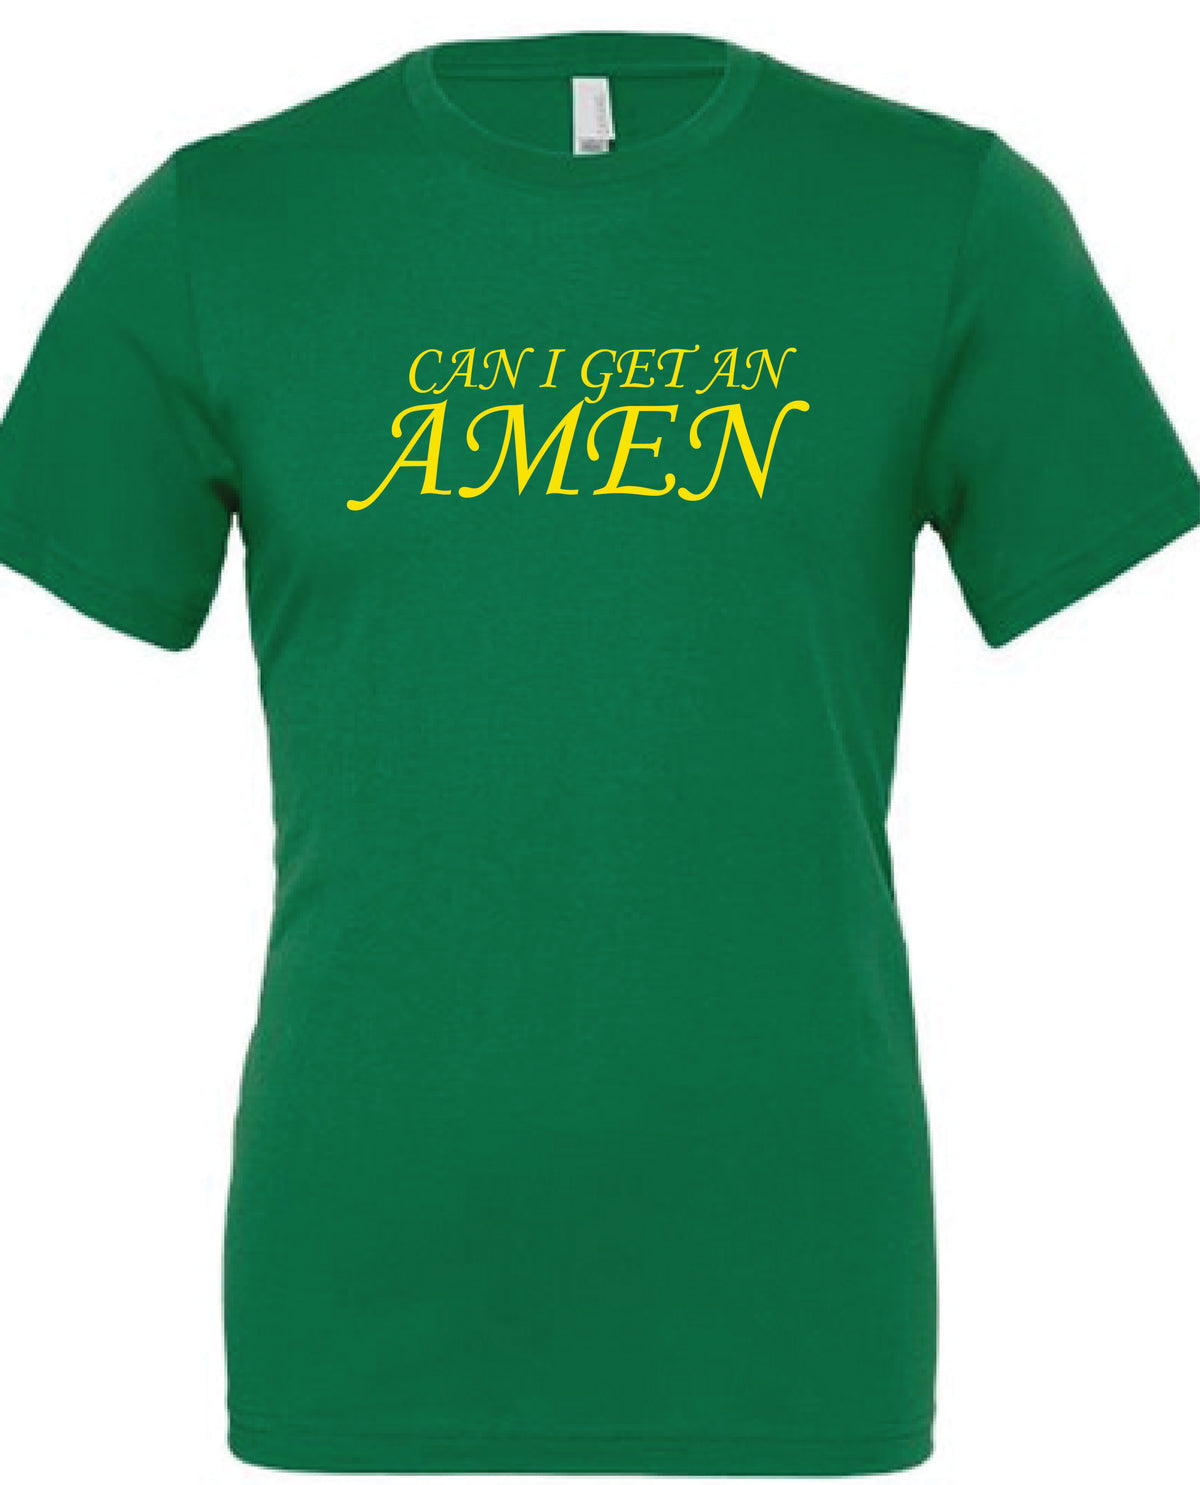 green shirt with yellow AMEN text